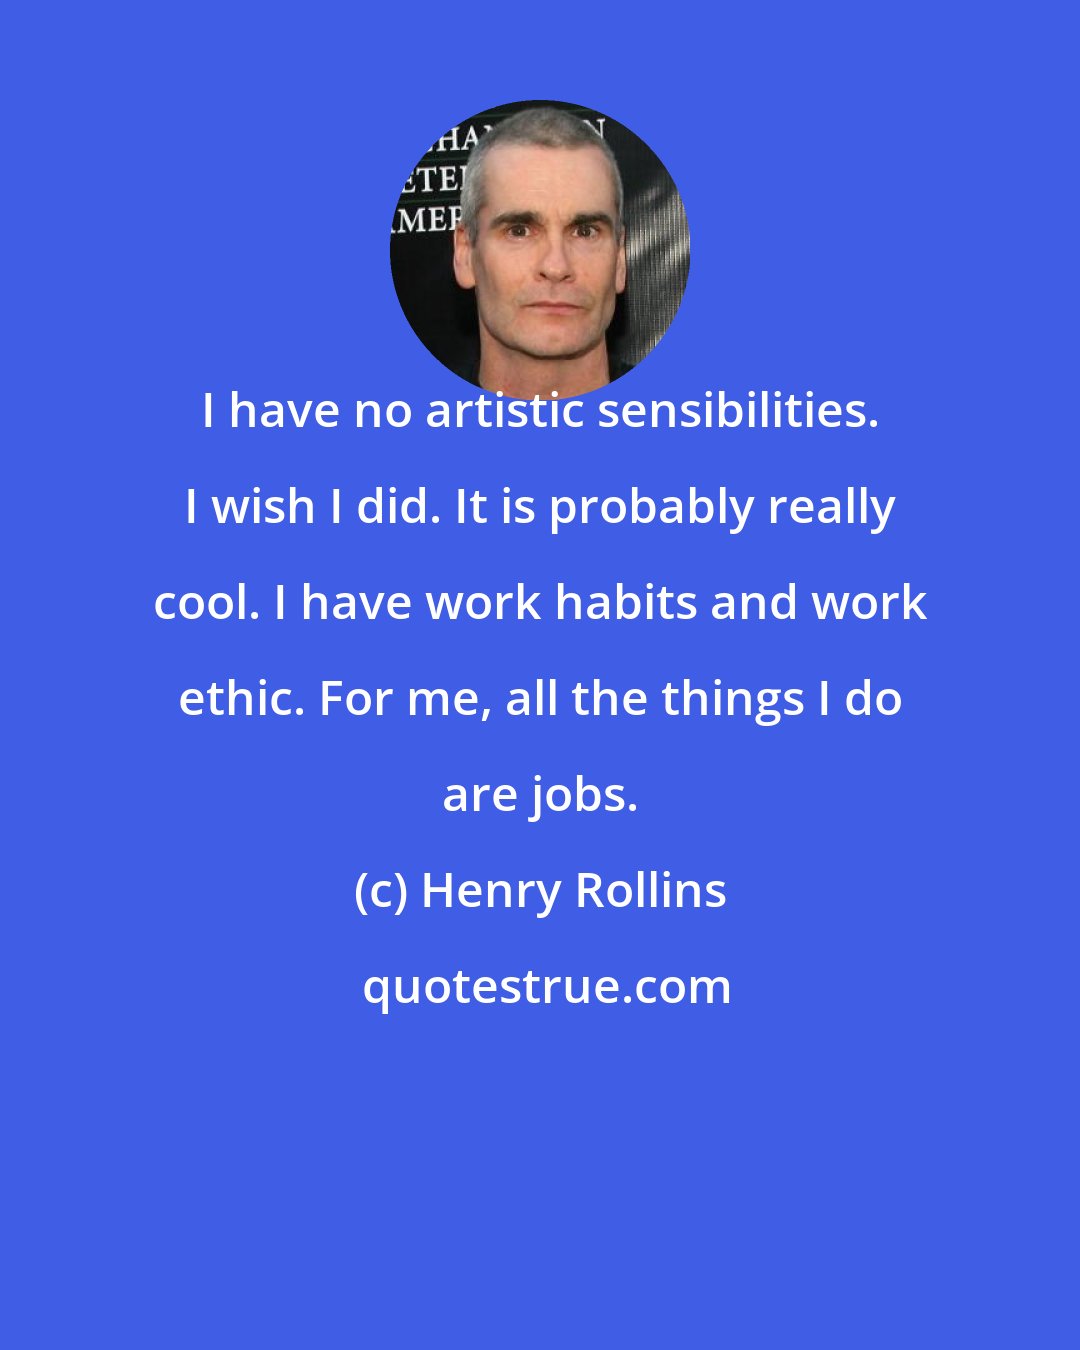 Henry Rollins: I have no artistic sensibilities. I wish I did. It is probably really cool. I have work habits and work ethic. For me, all the things I do are jobs.